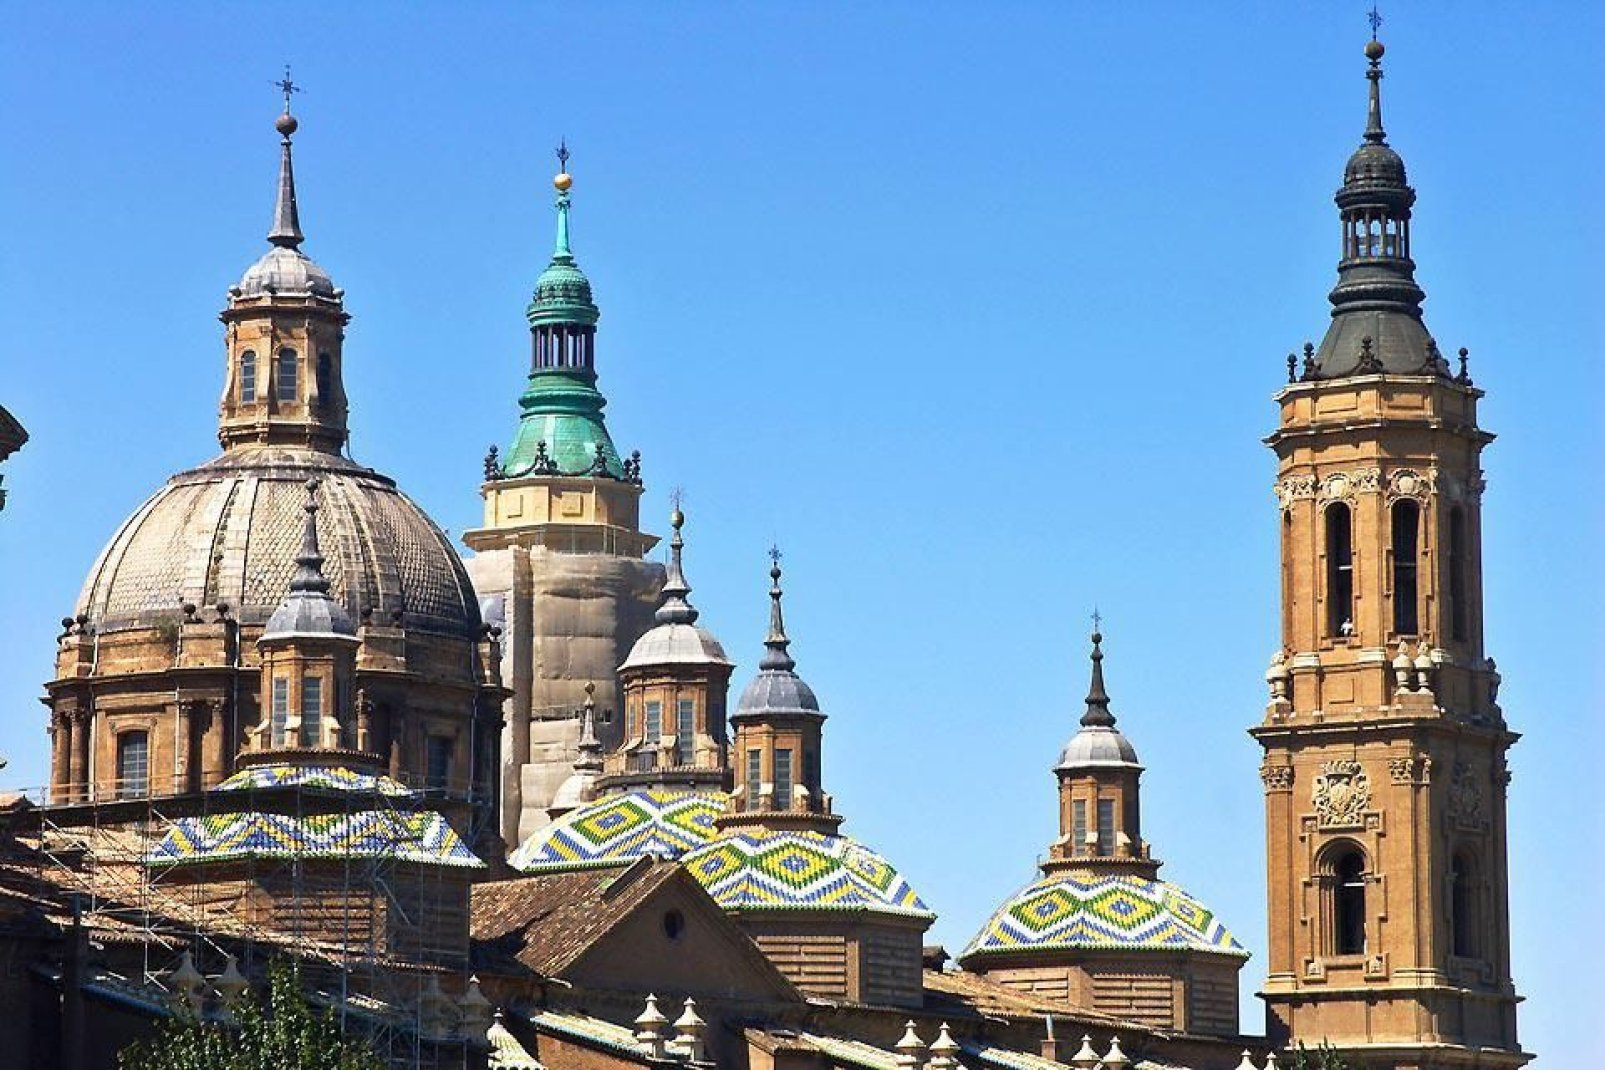 The finely finished cúpuluas are an example of the architectural beauty of the city